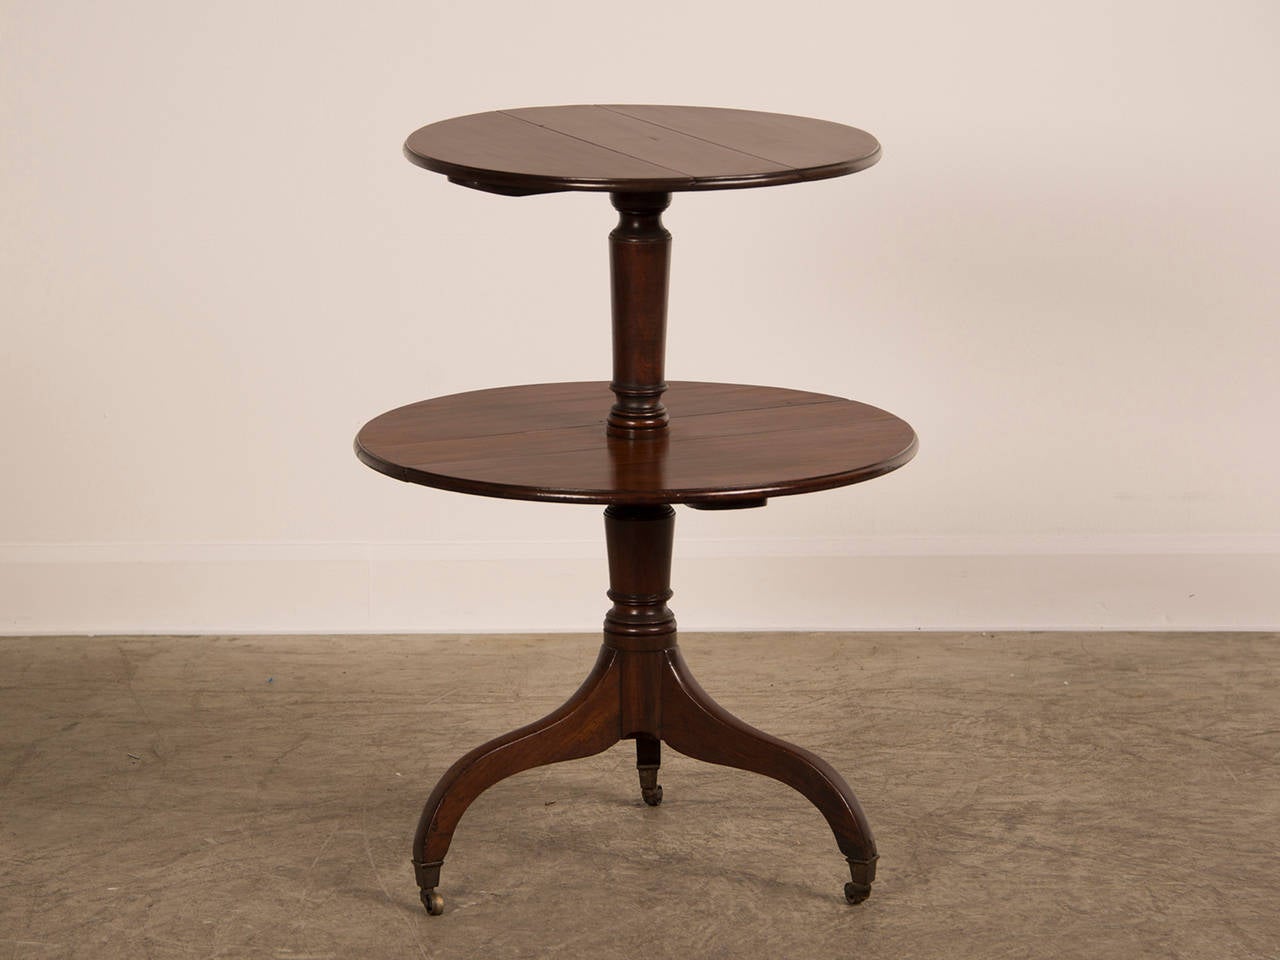 A beautiful George III period mahogany pedestal table having two levels, each with drop leaves on a tripod base from England c. 1820.